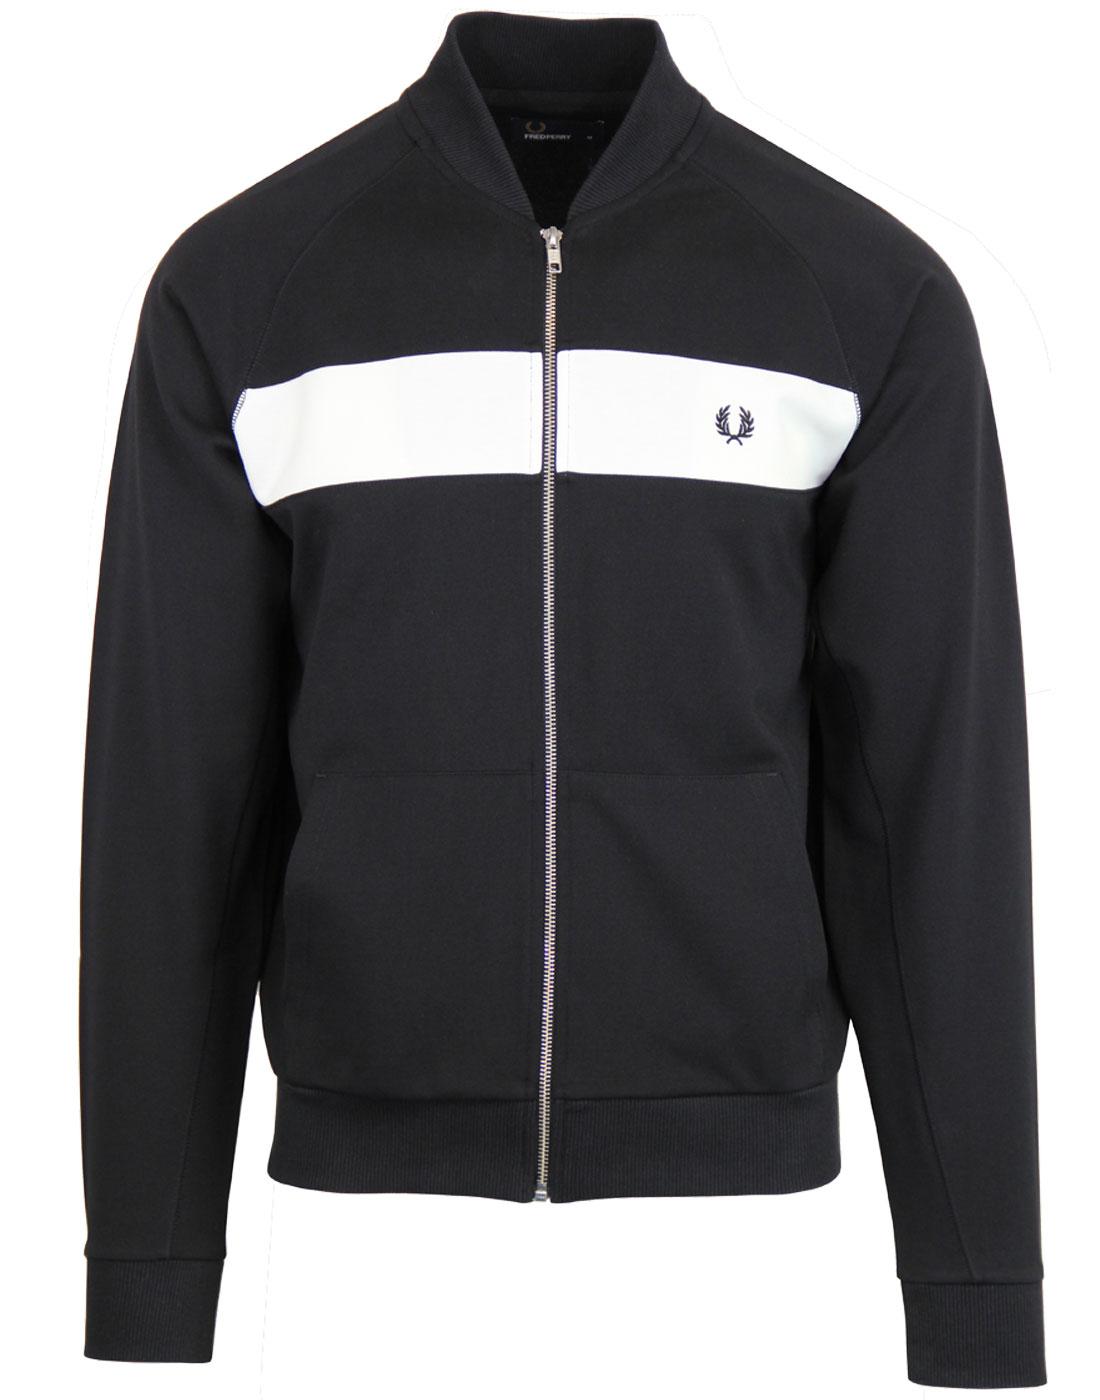 FRED PERRY Retro Indie Reverse Tricot Track Jacket